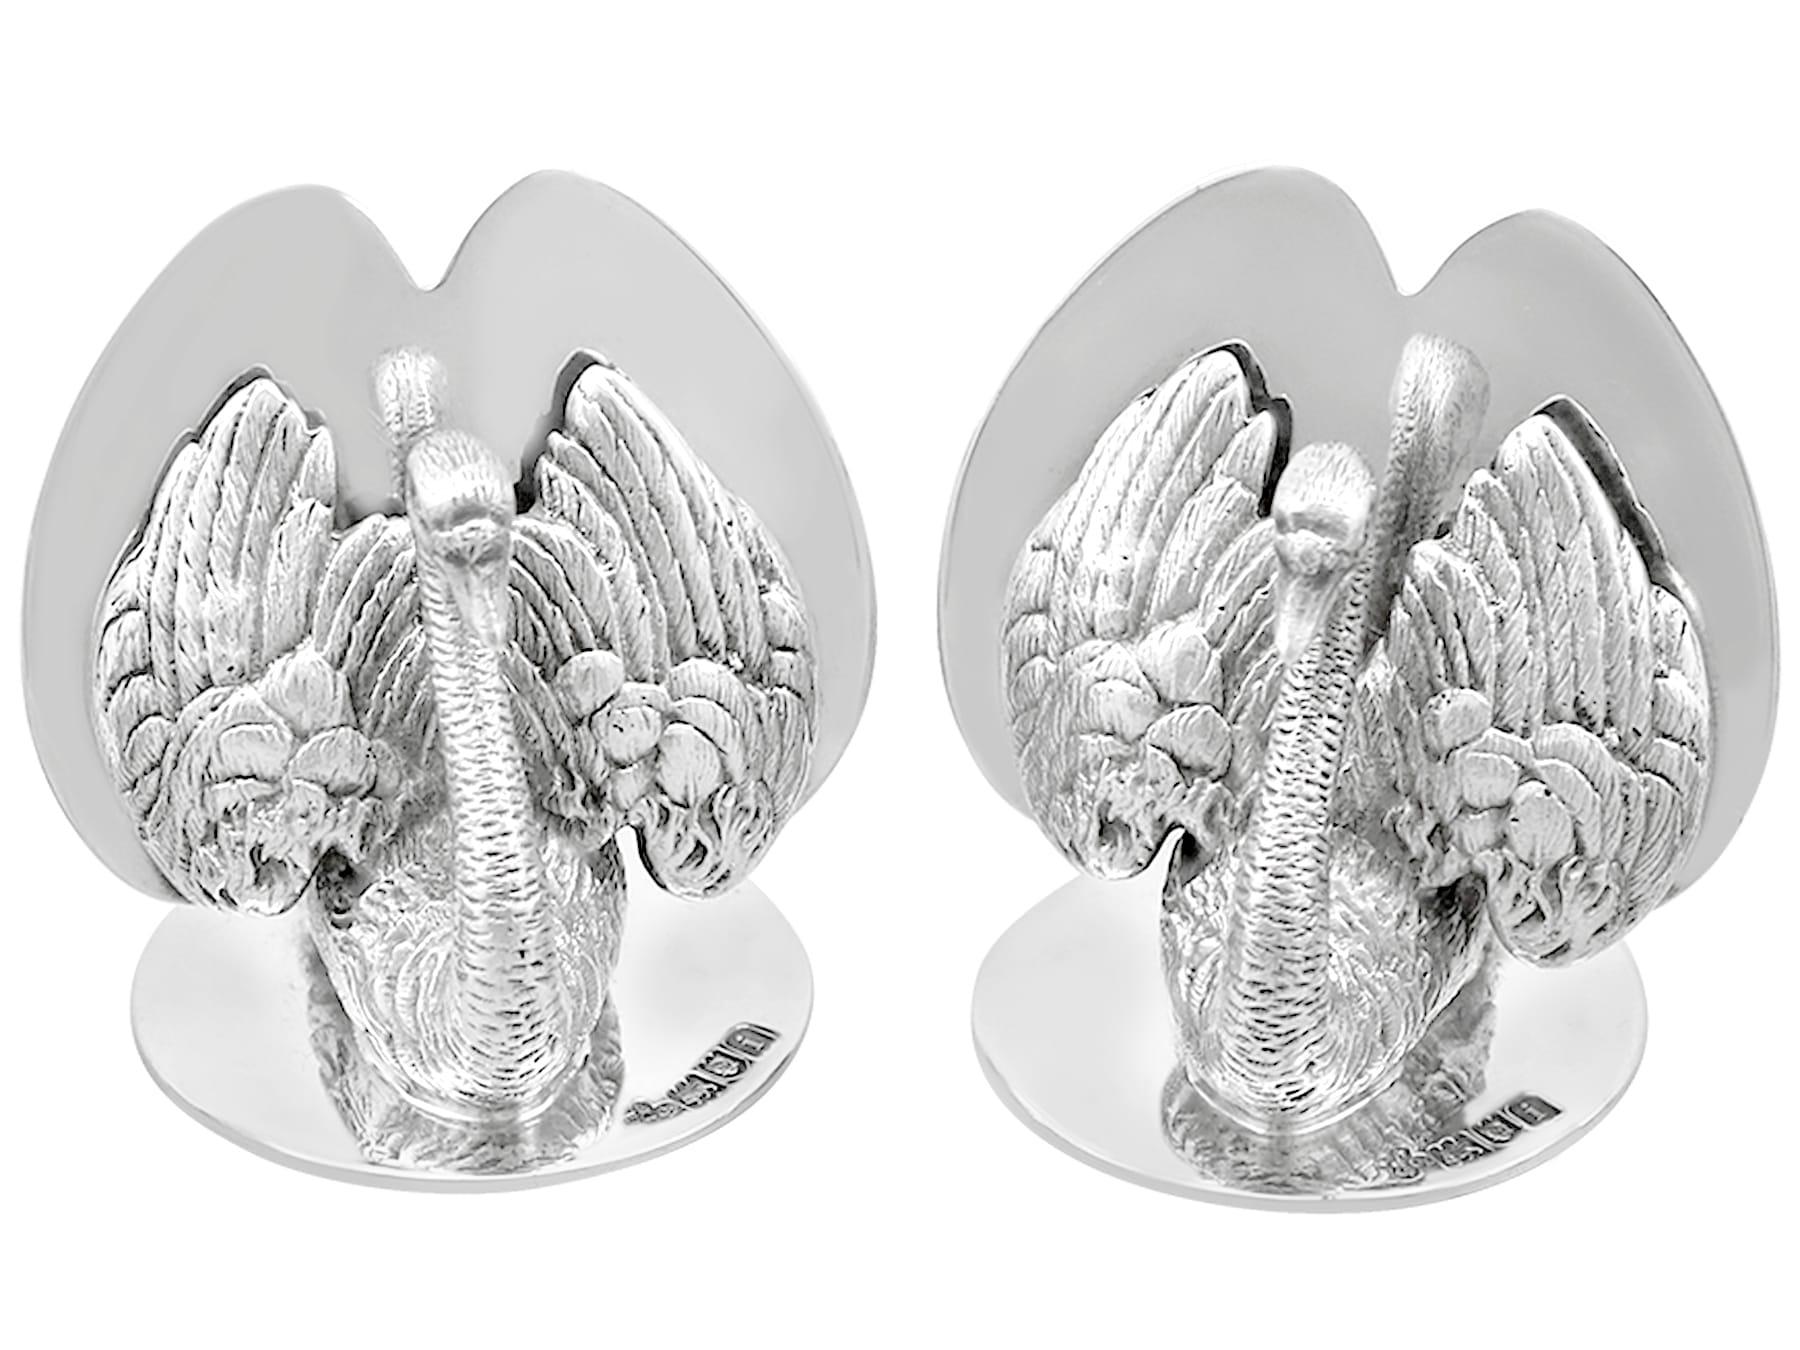 An exceptional, fine and impressive set of four antique Edwardian English sterling silver swan menu / card holders; an addition to our diverse dining silverware collection

These exceptional, fine and impressive antique Edwardian sterling silver